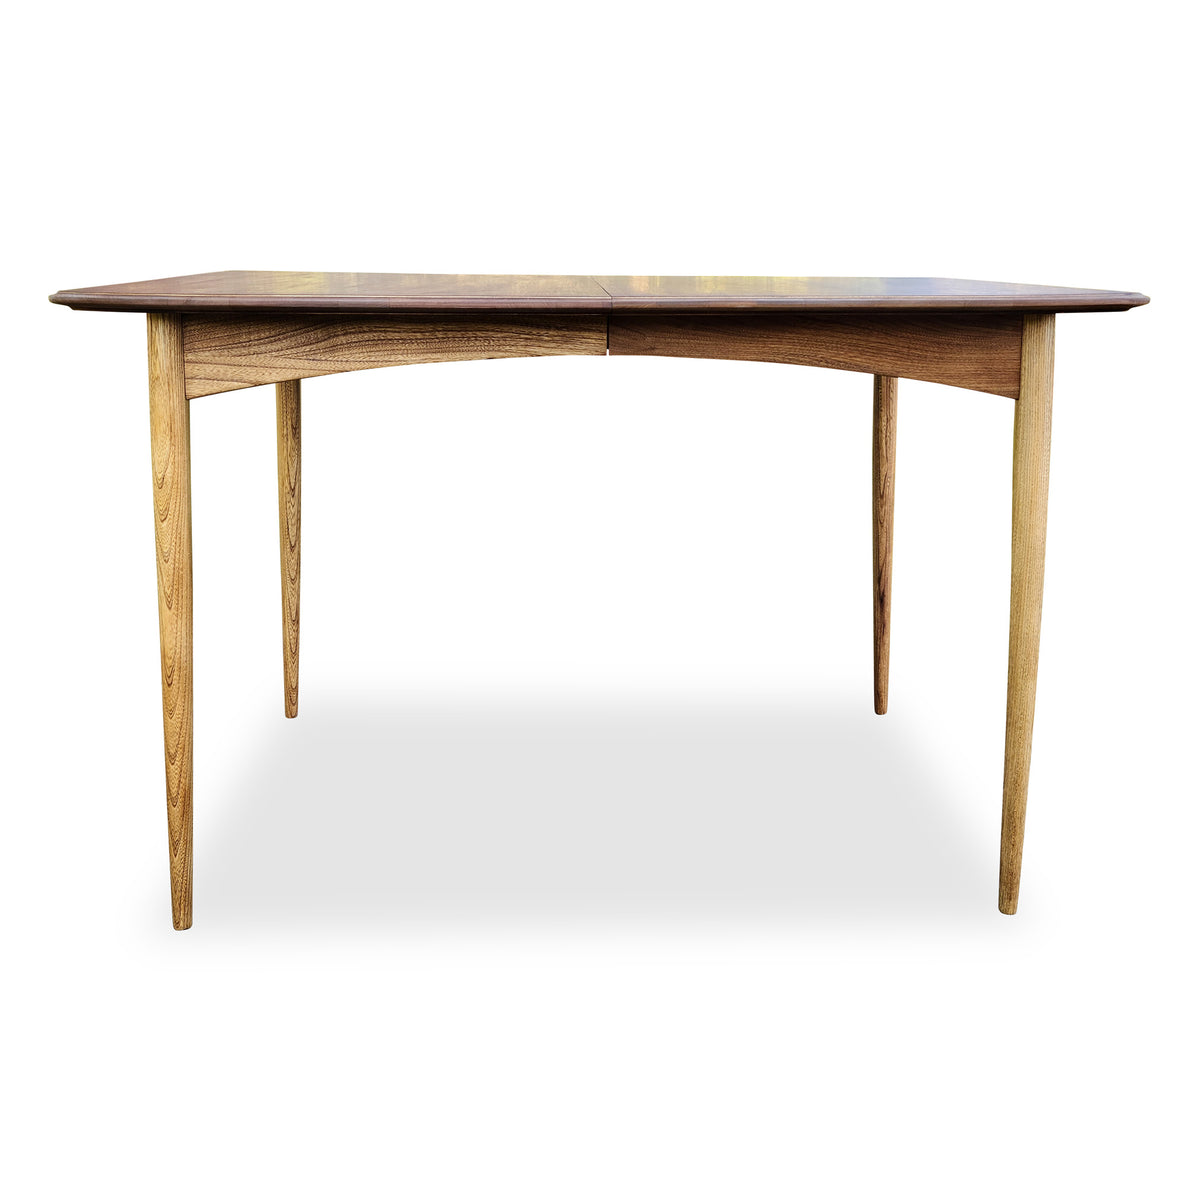 Walnut and Ash Dining Table by Deilcraft